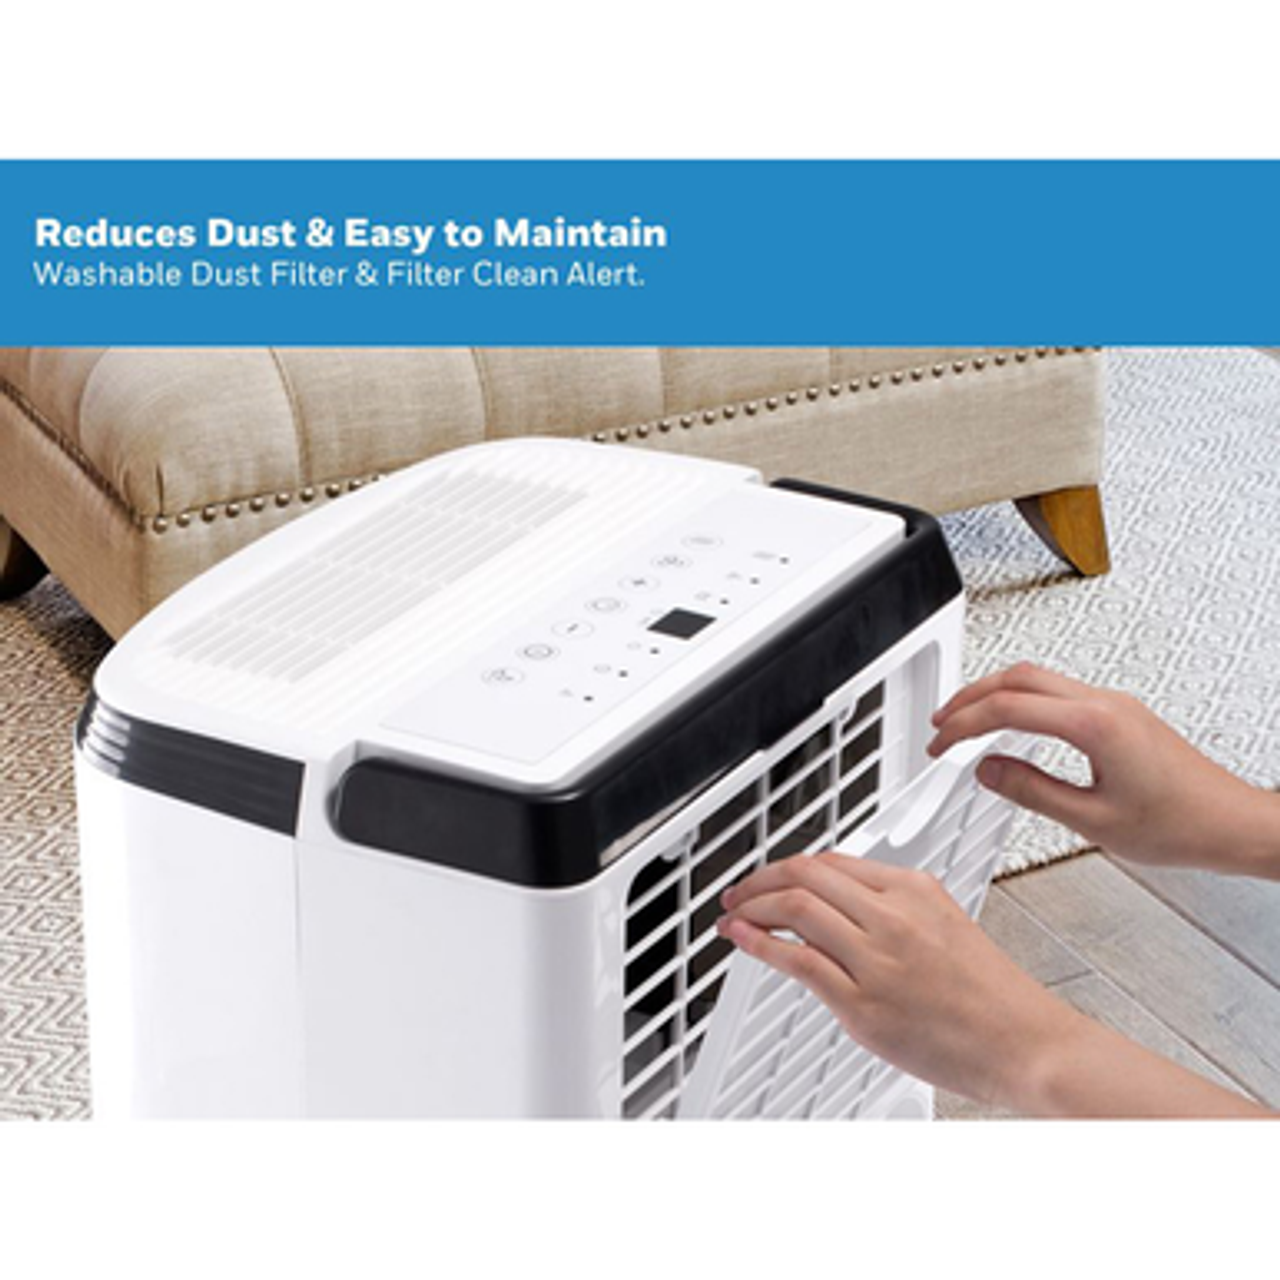 50-pint dehumidifier washable dust filters